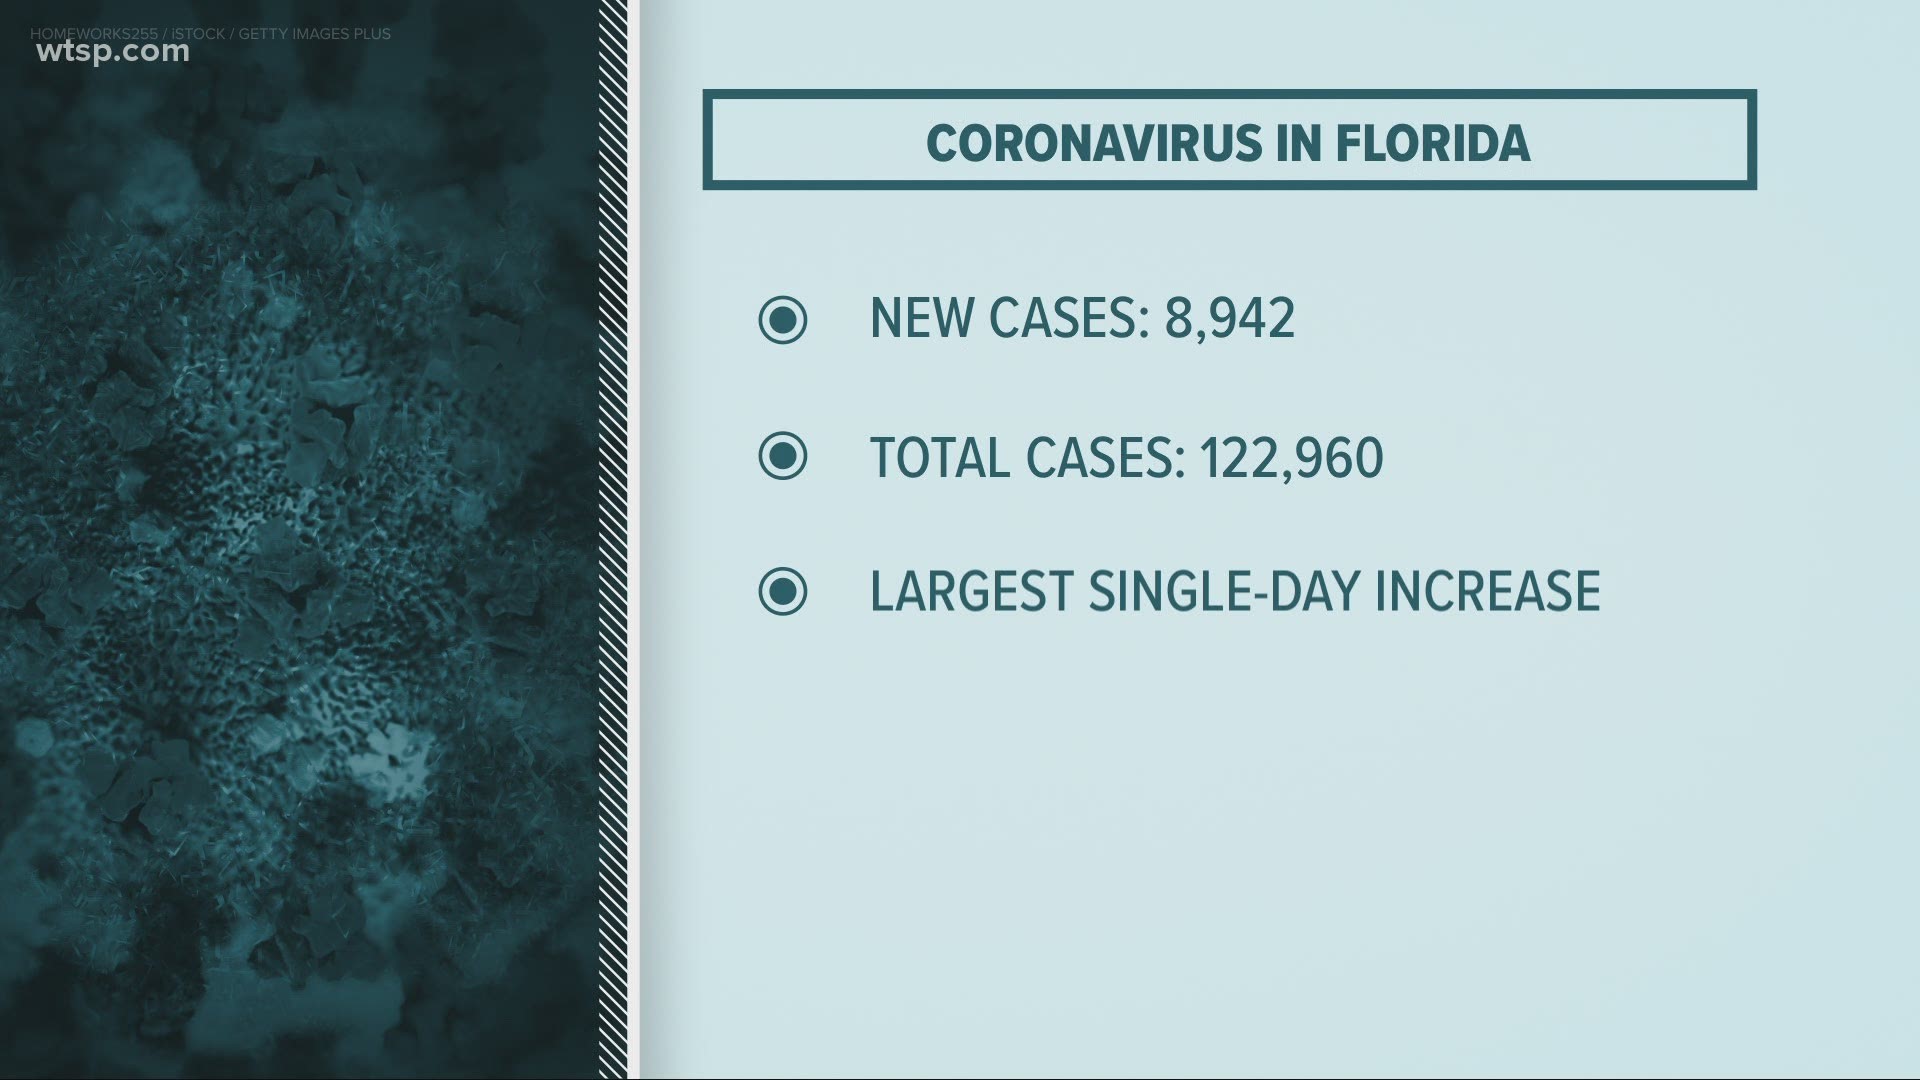 June 26 was the first time Florida reported a number higher than 8,000.